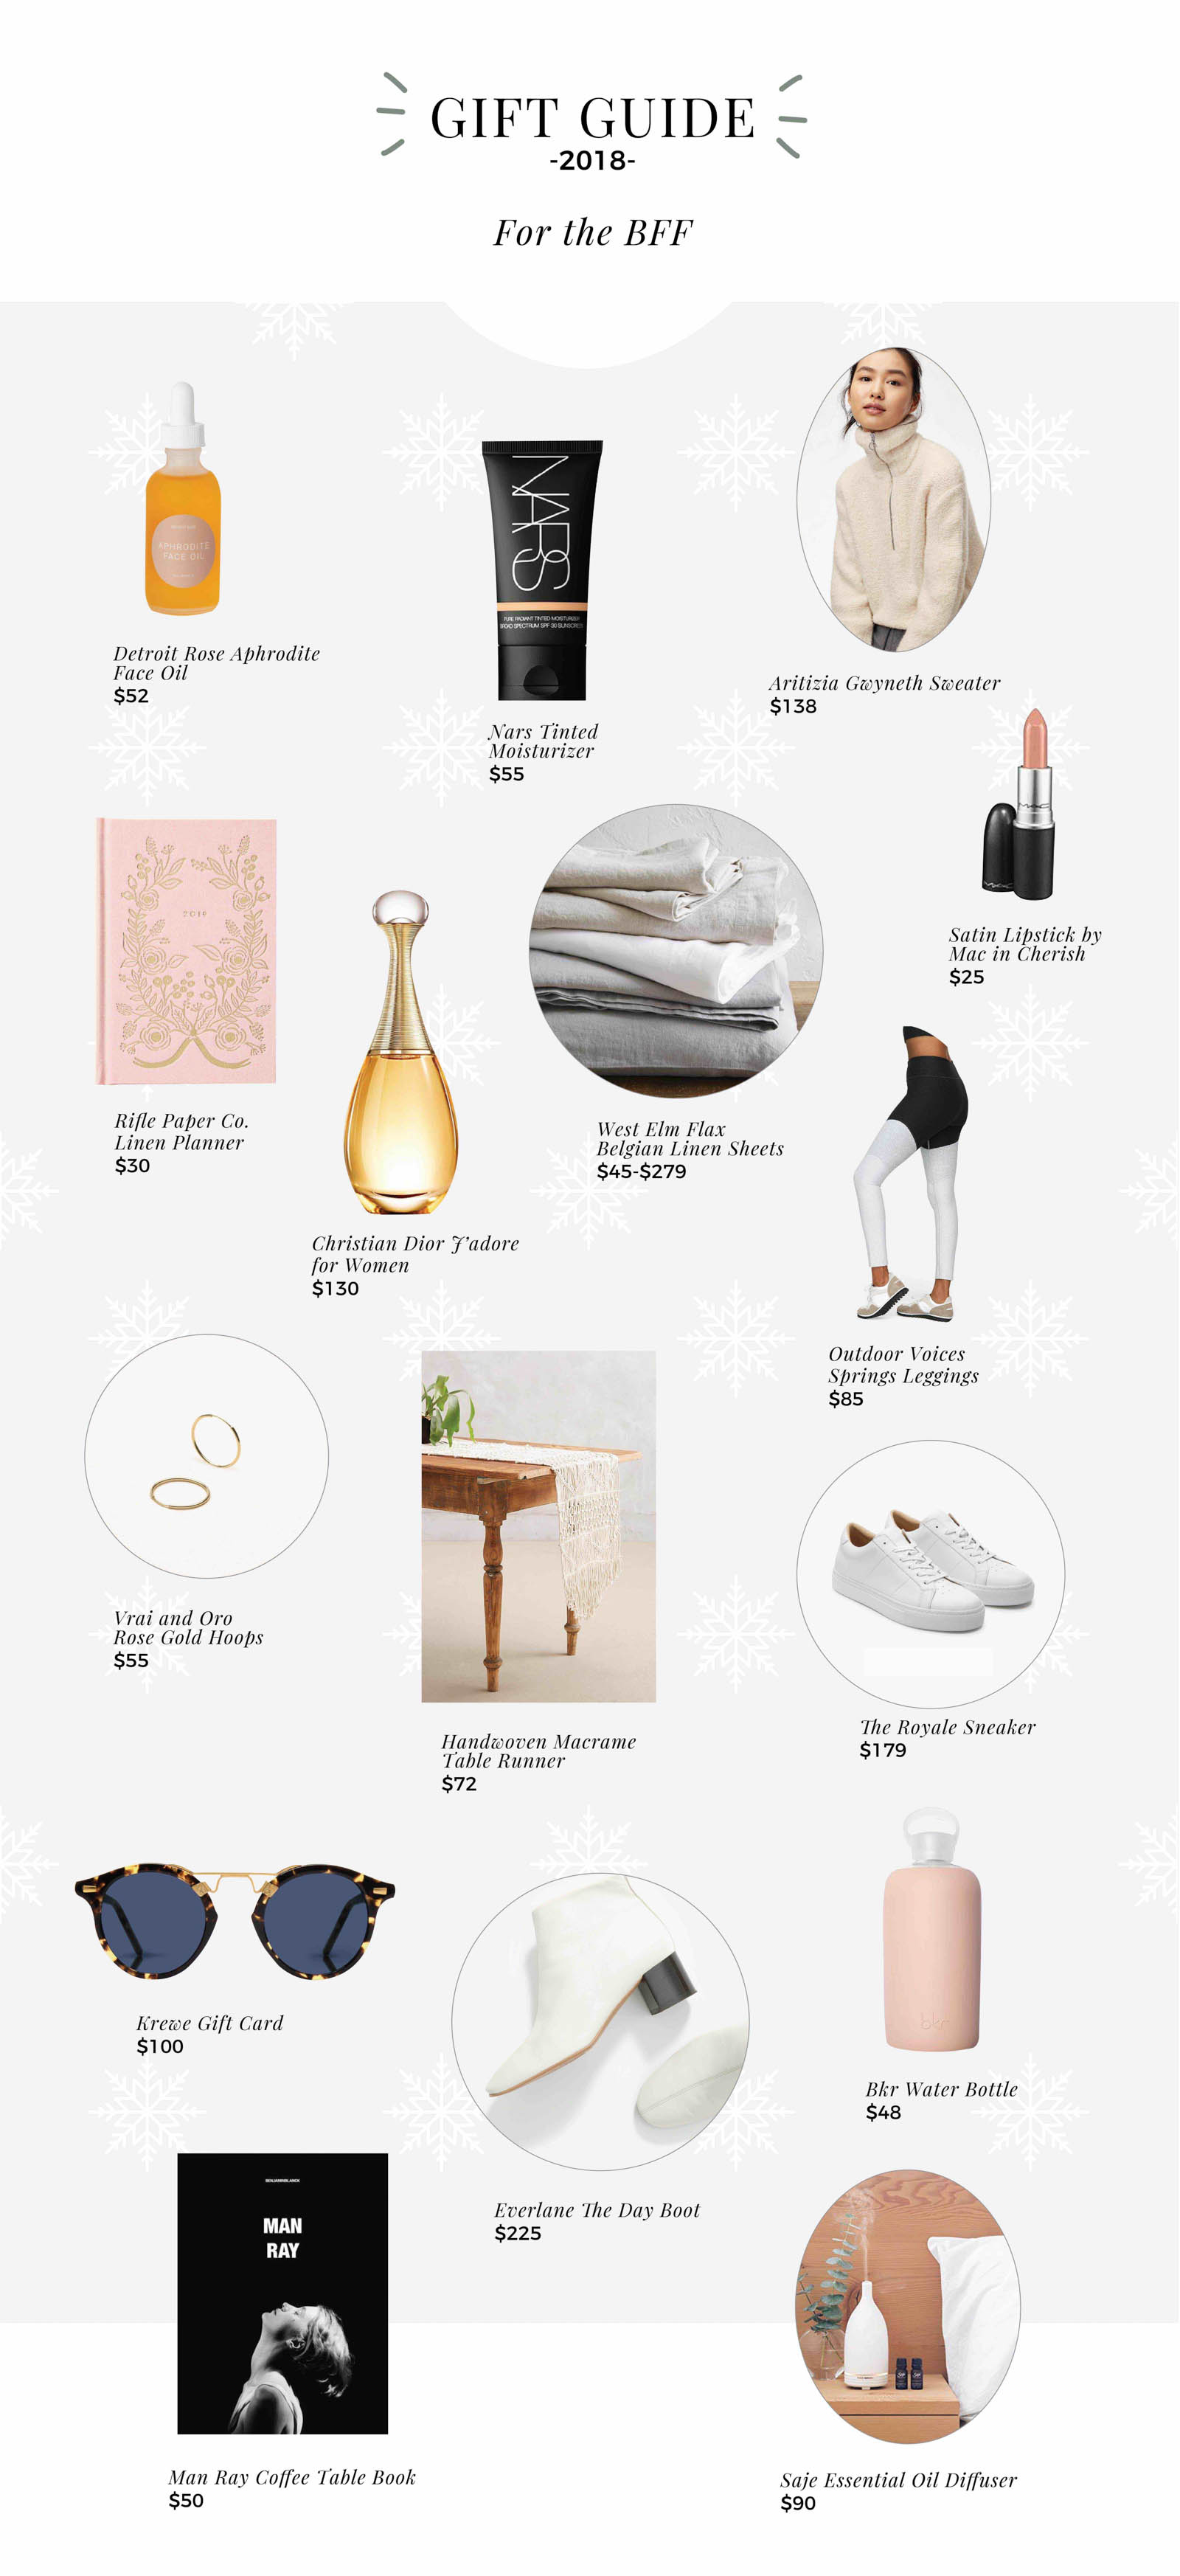 The 2018 Holiday Gift Guide: For the BFF is filled with goodies for your BFF/ mom/ sister/ yourself (because you’ve worked hard this year & you deserve it!)